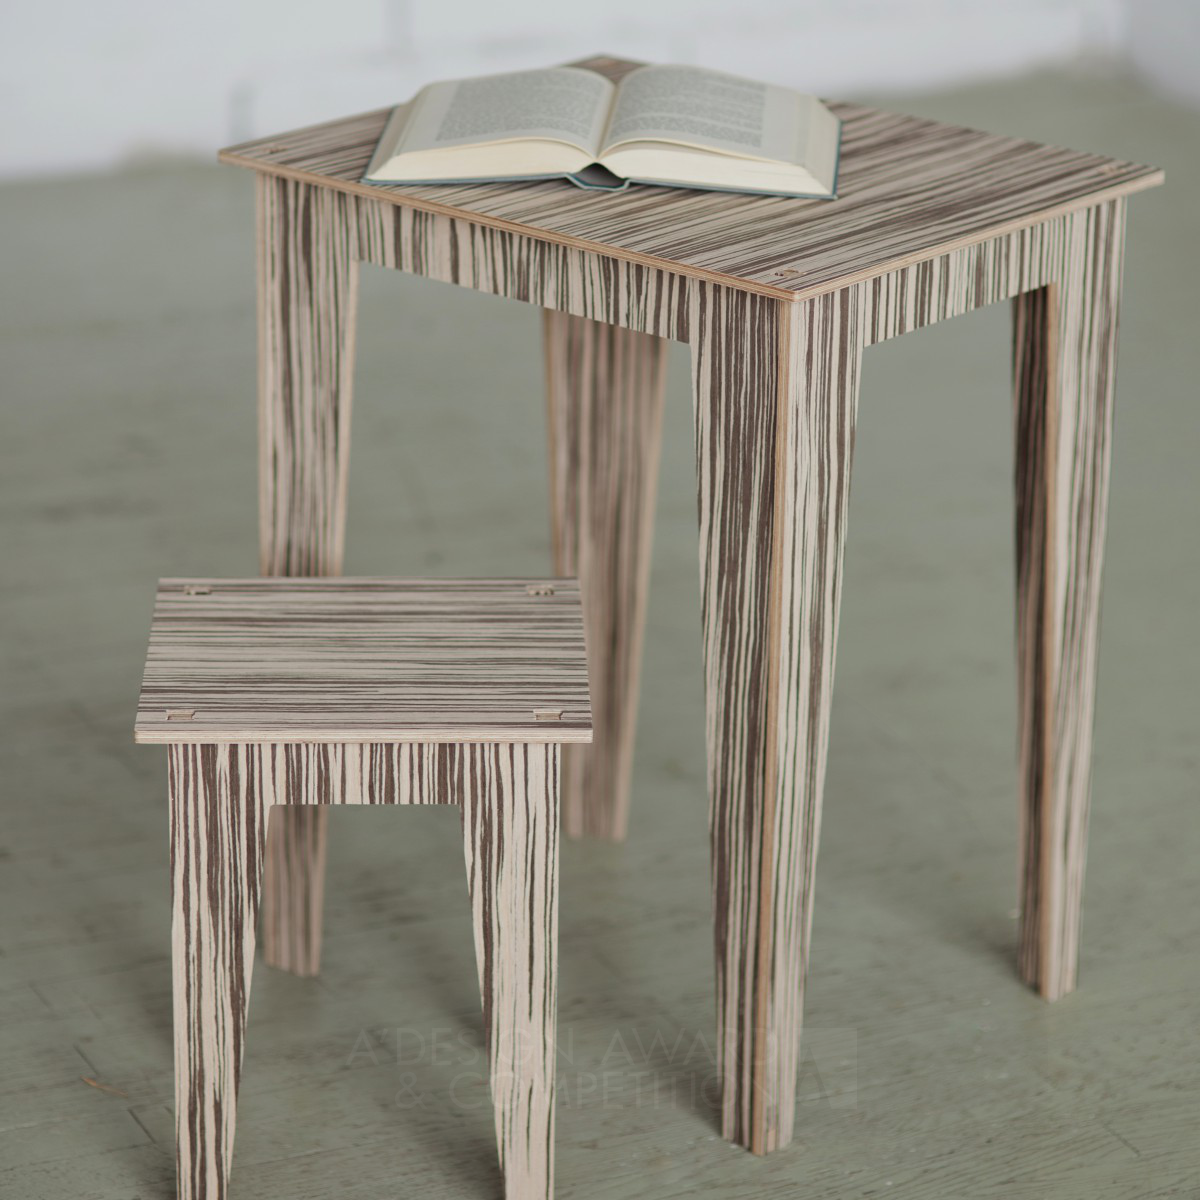 Cozy Table by Kirigami Design